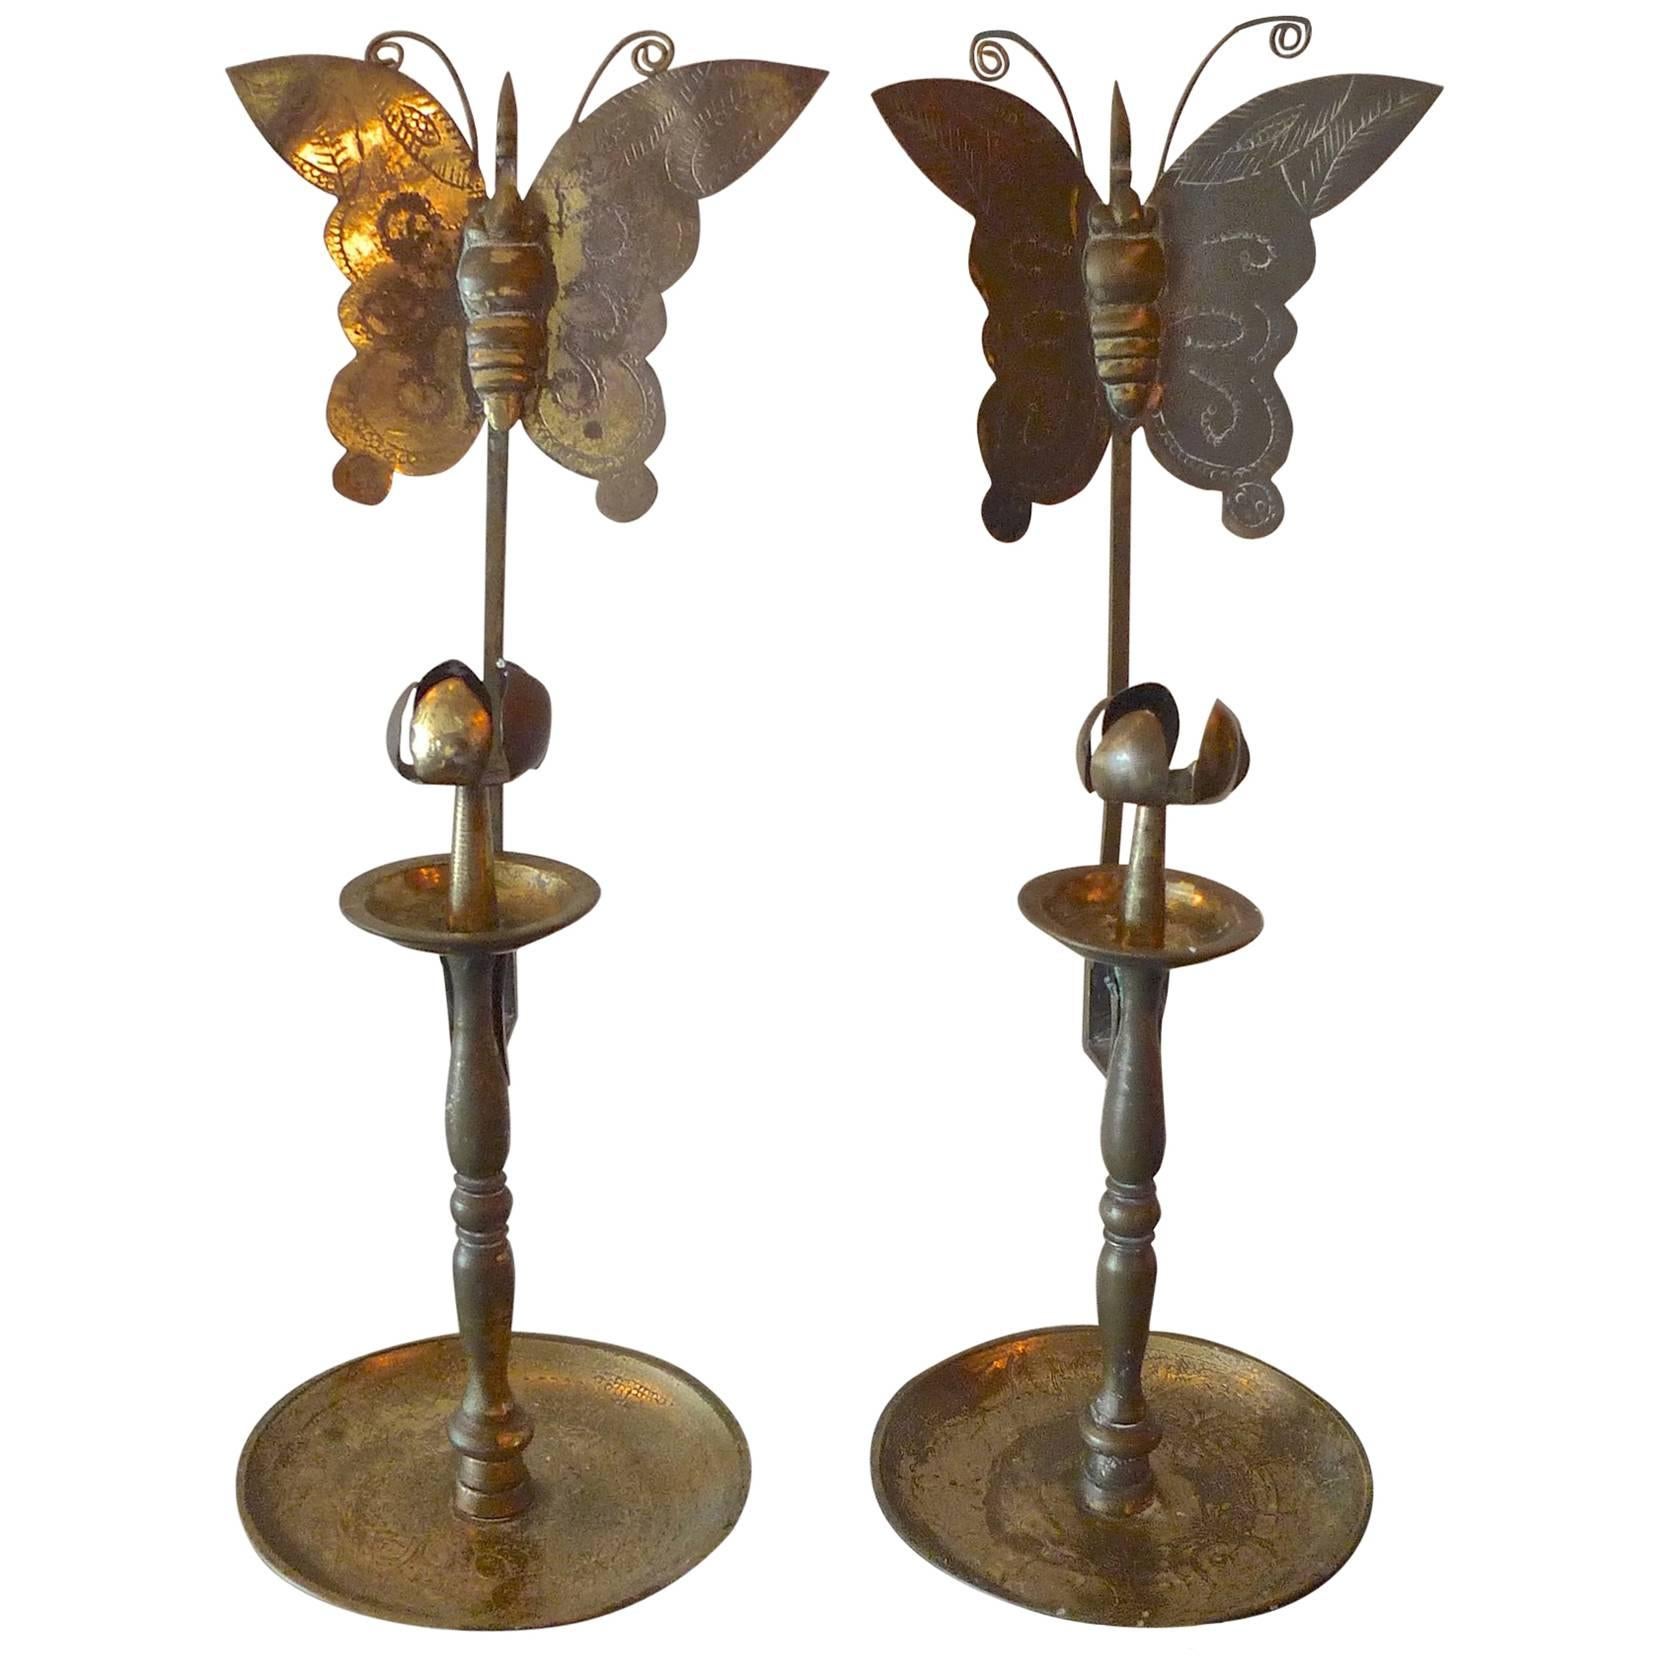 2 French 19th Century Etched Polished Tin Candleholders